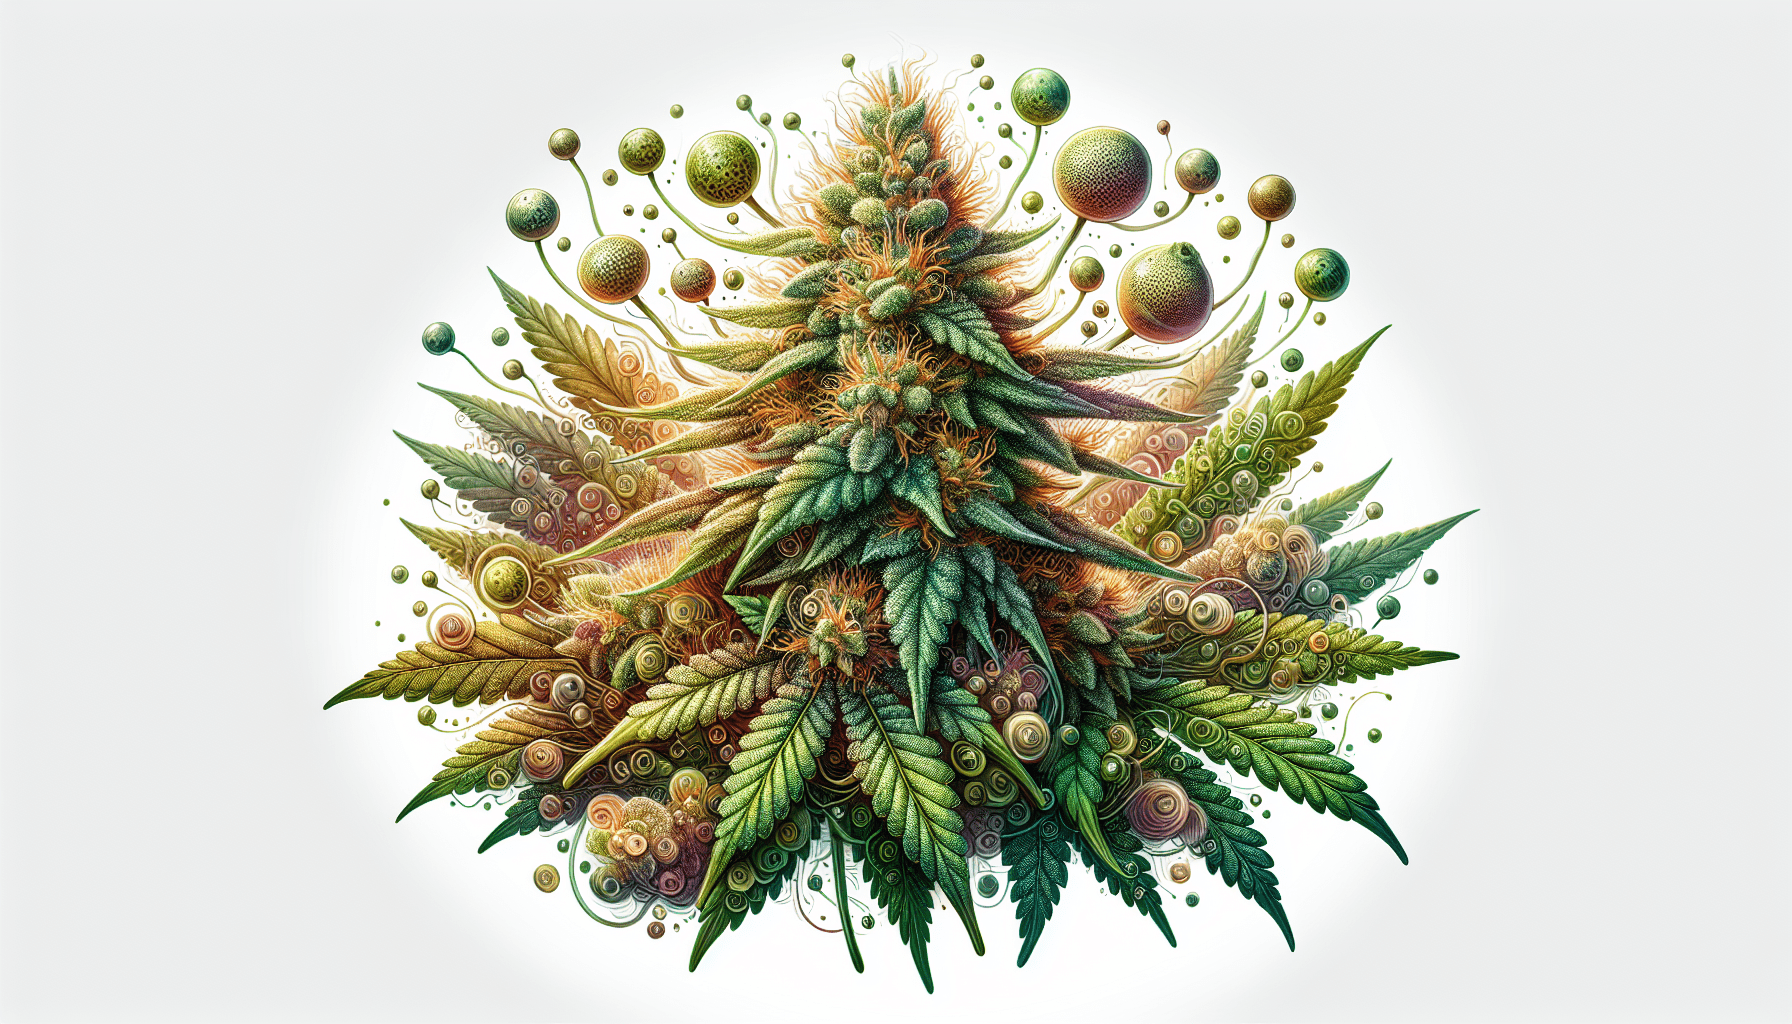 The Science of Cannabis – Breaking Down the Technical Terms and Jargon